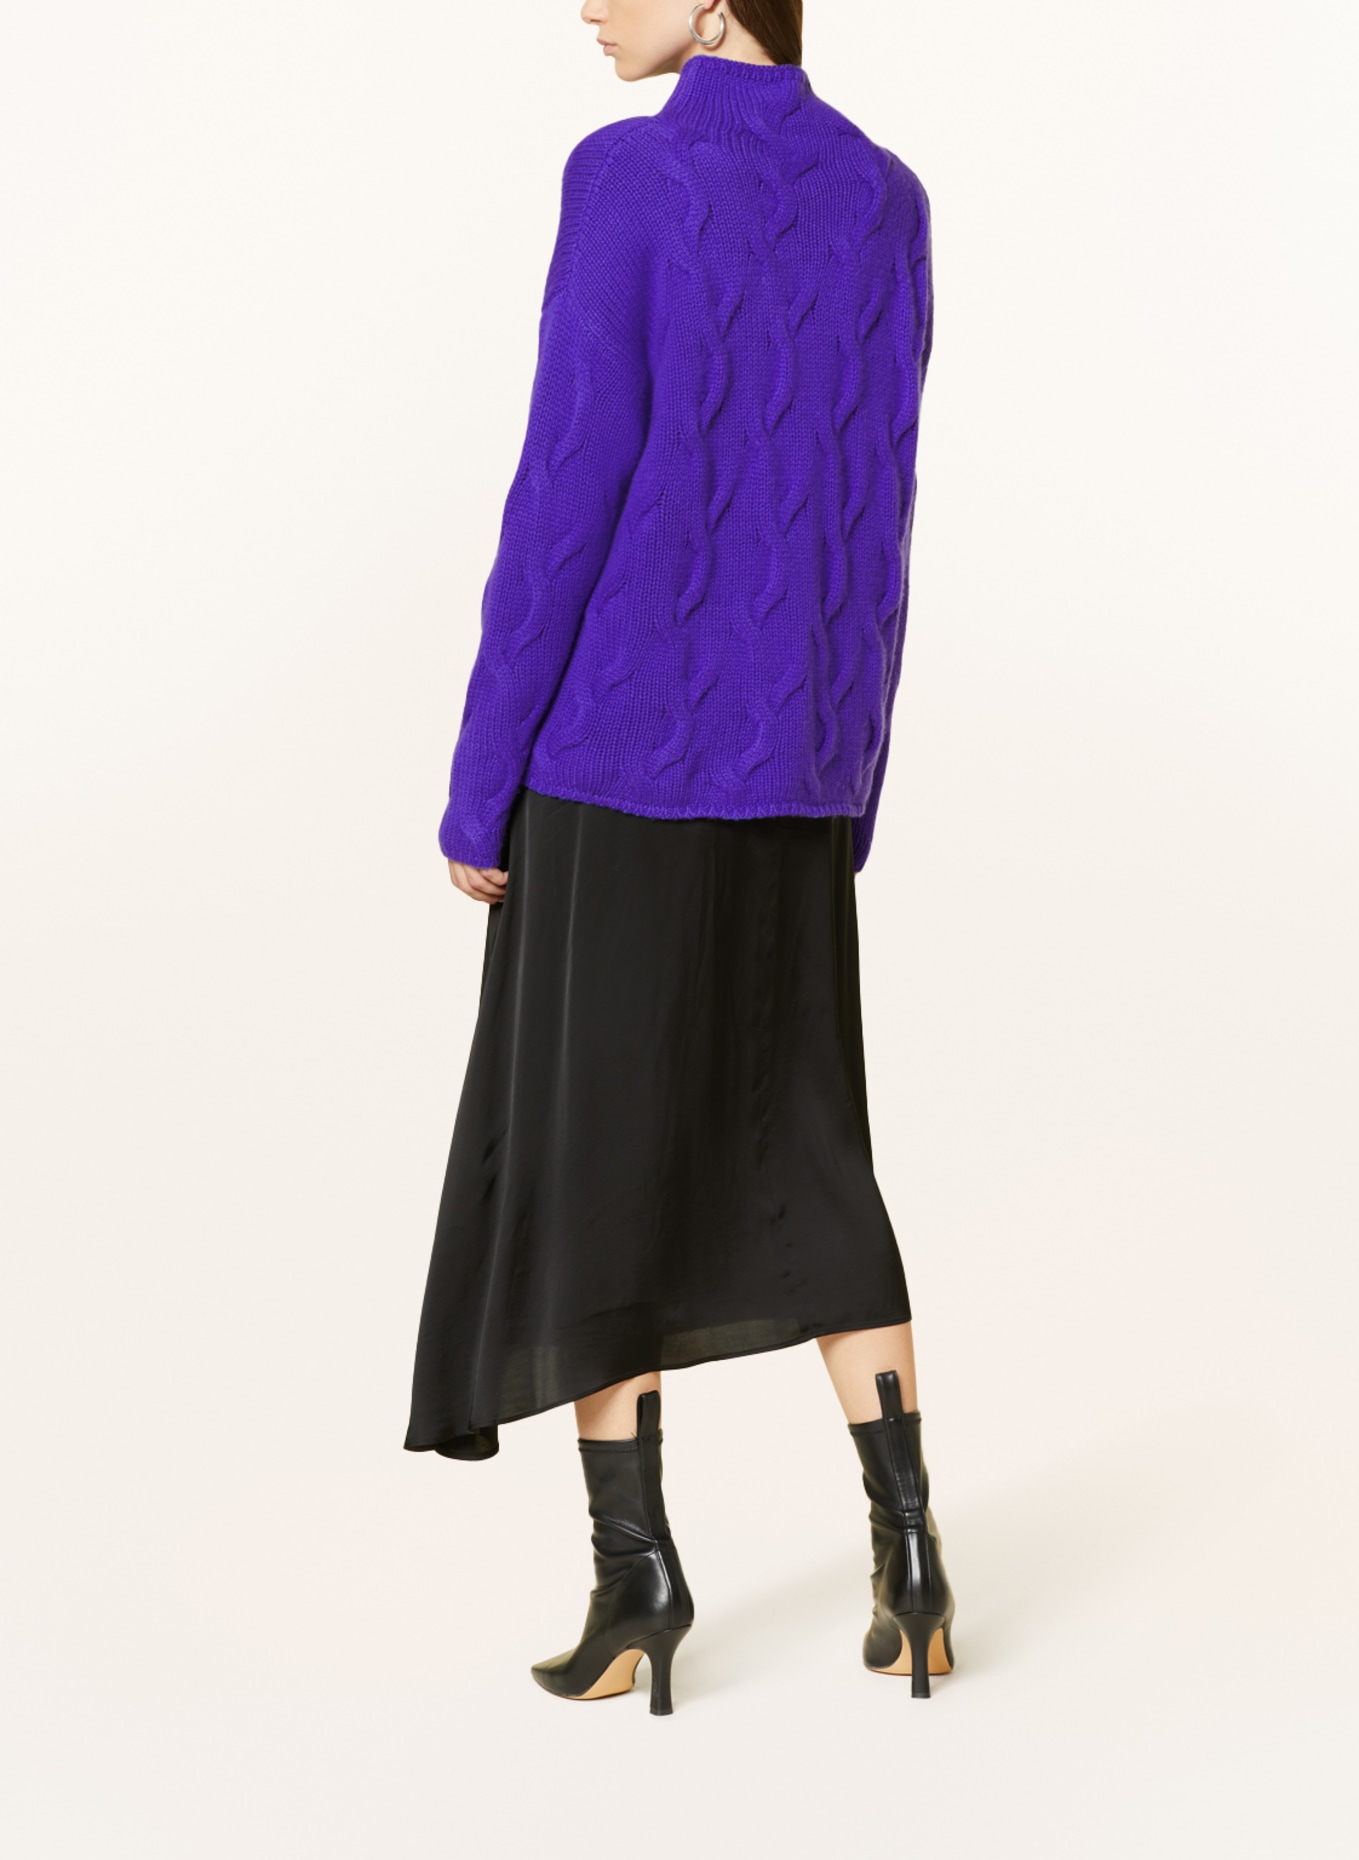 lilienfels Sweater with cashmere, Color: WLC-470650S lila (Image 3)